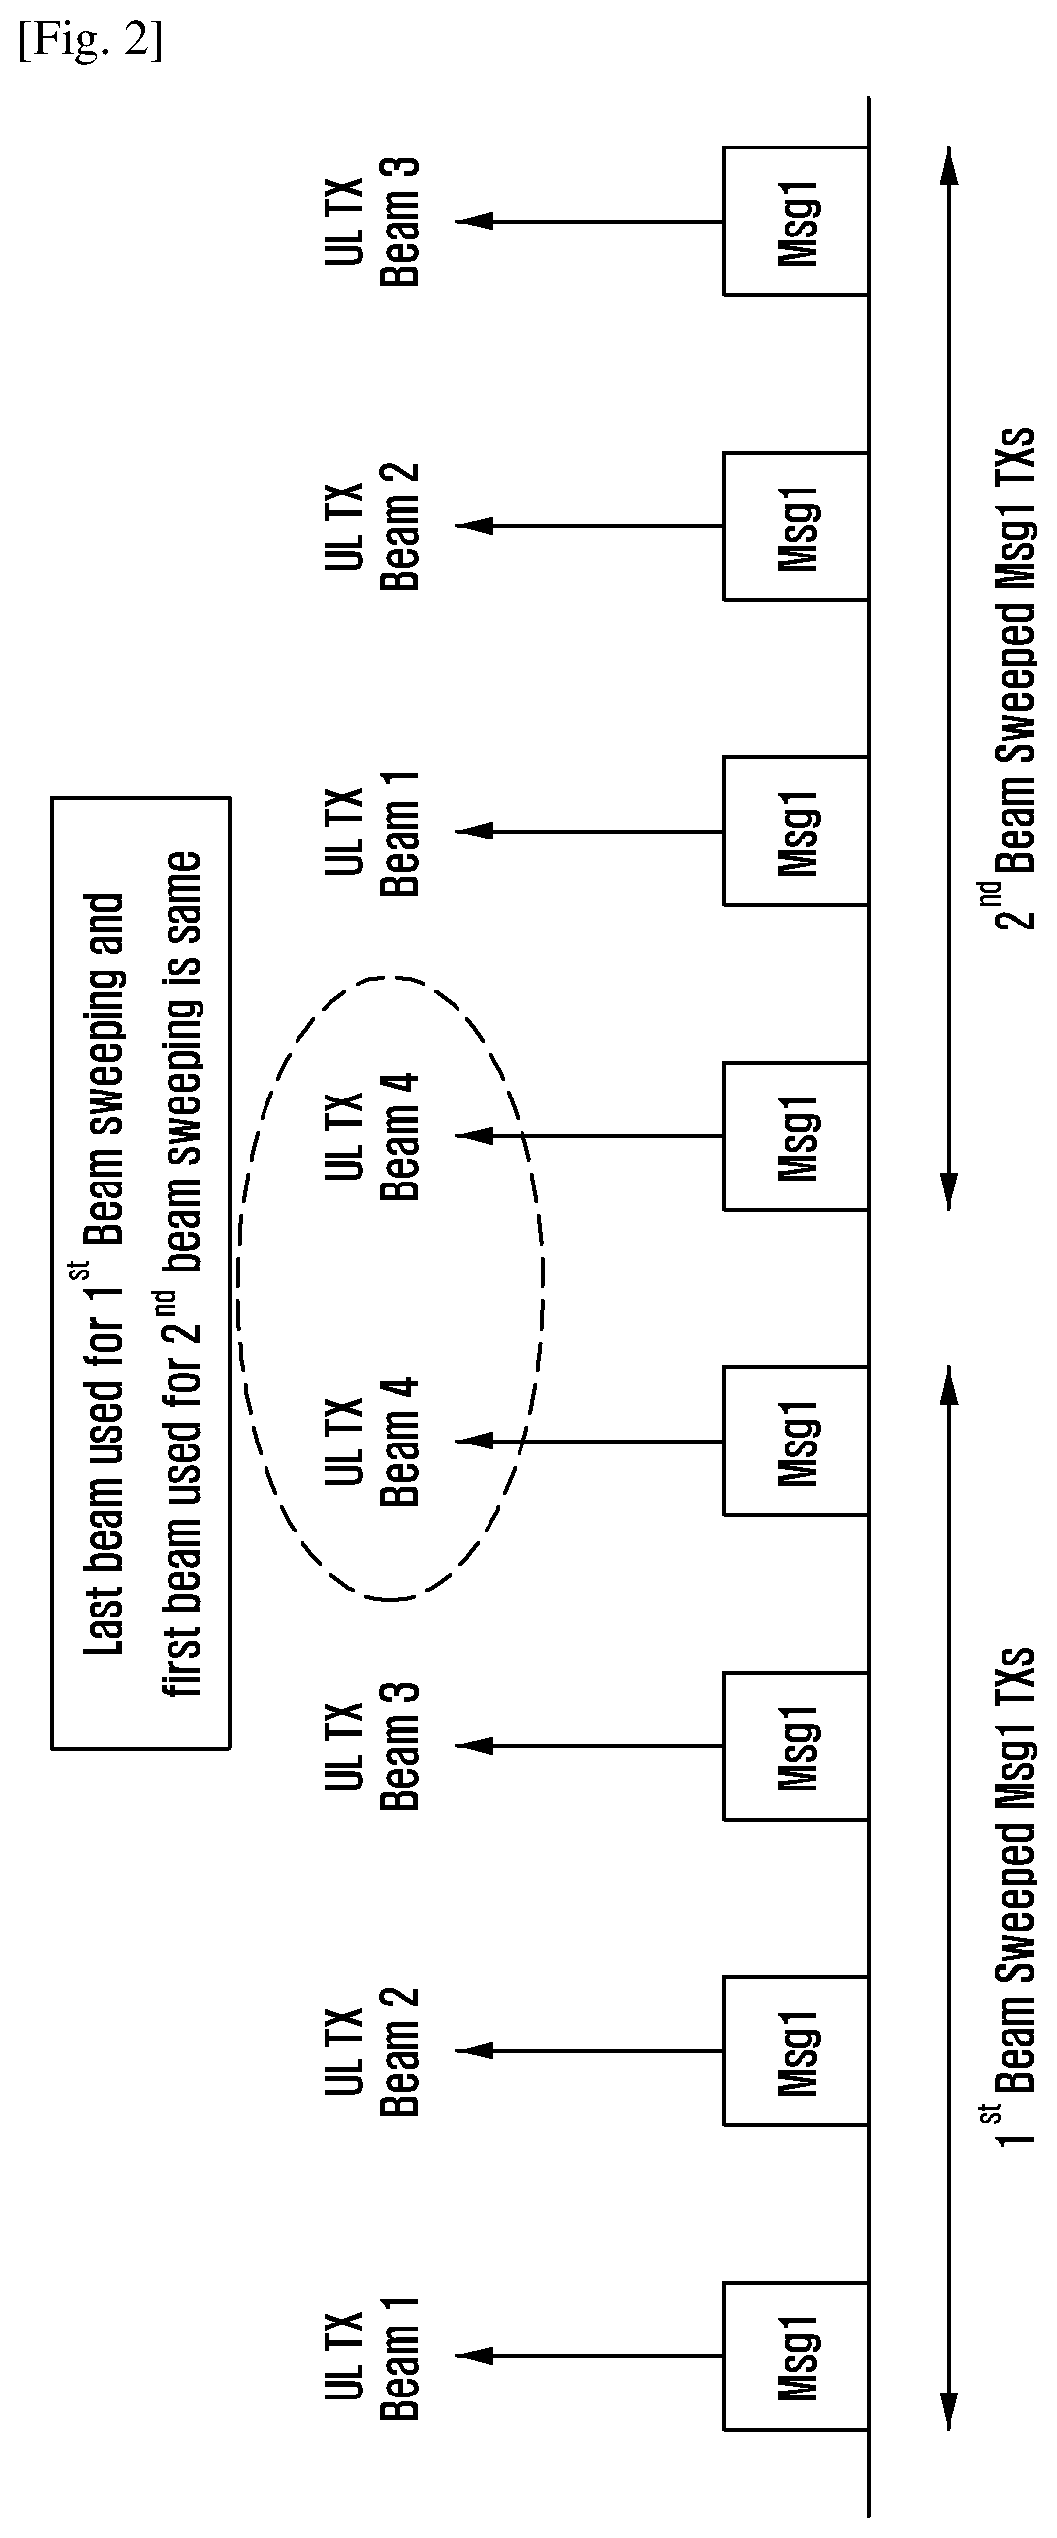 Apparatus and method of identifying downlink transmission beam in a cellular network